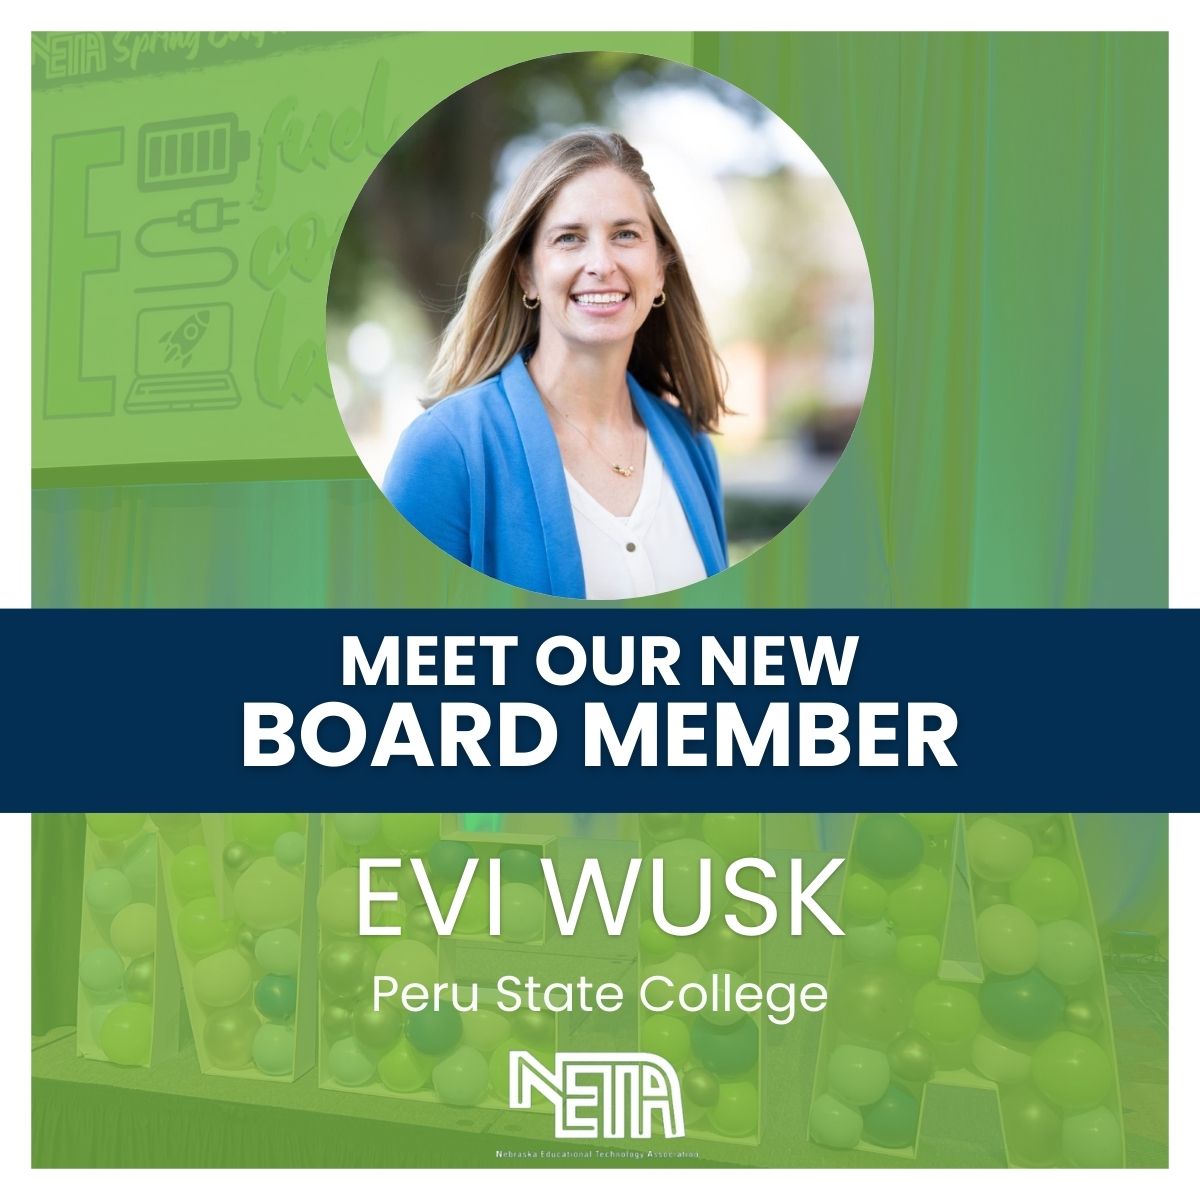 Let's give a big #yourNETA welcome to one of our newest board members, Evi Wusk from Peru State College!